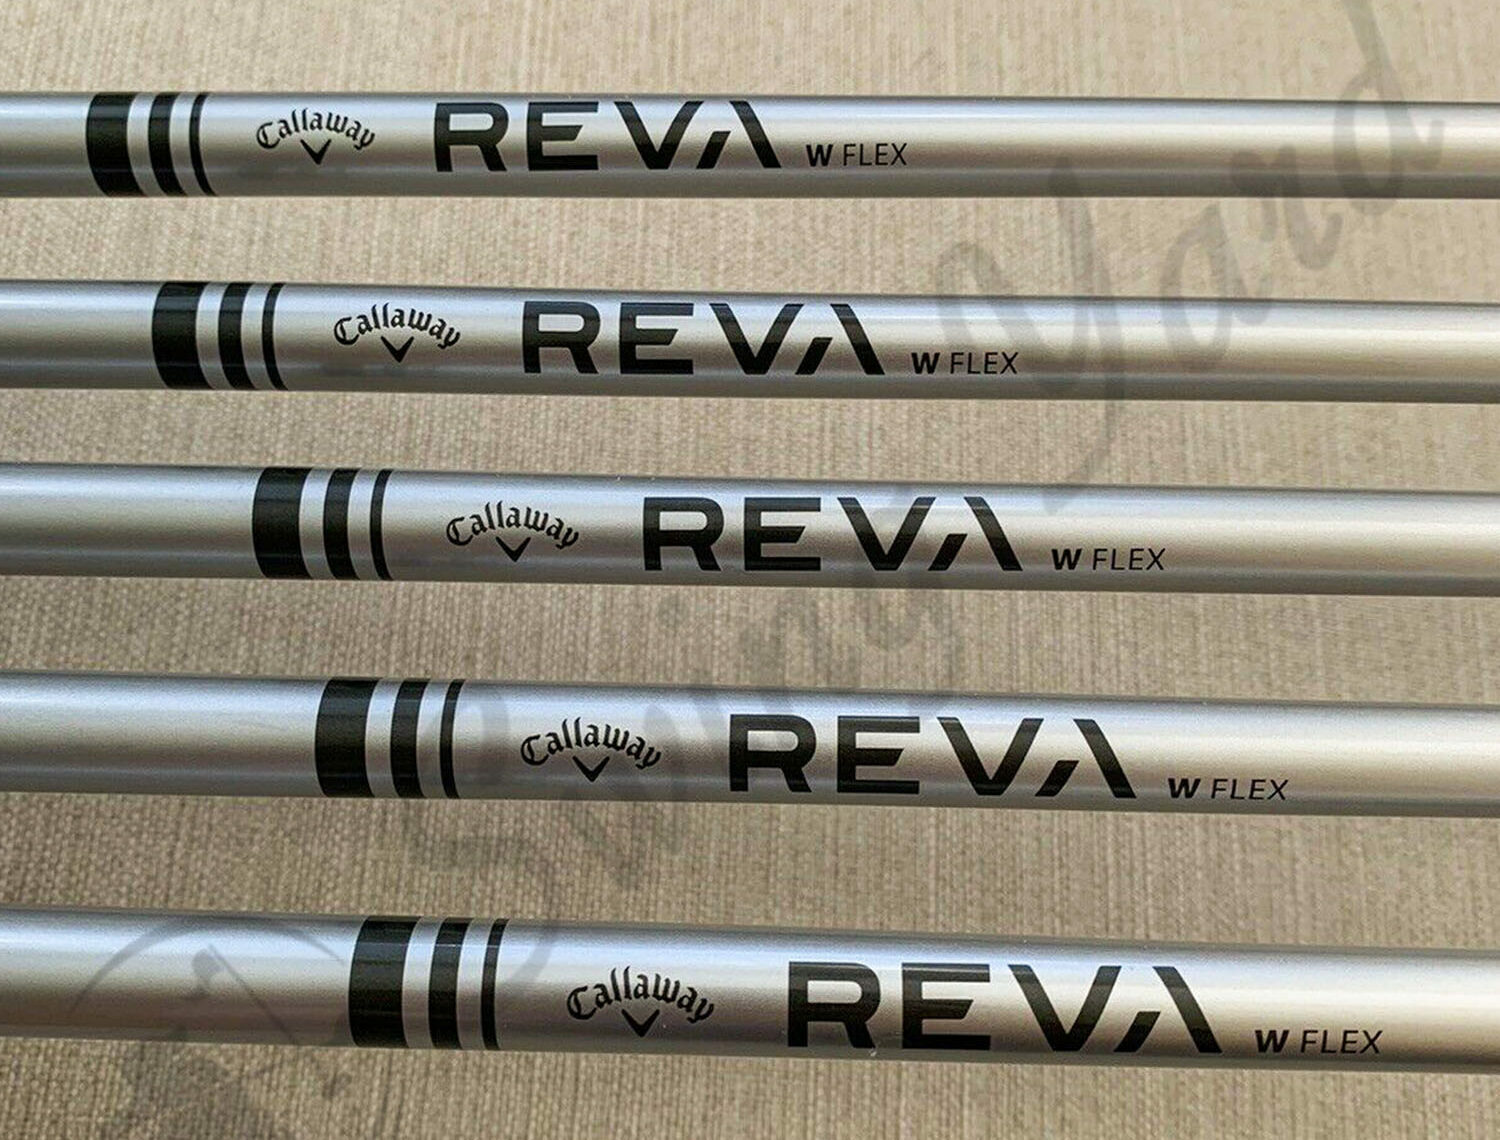 Set of Callaway Reva shafts for testing at the driving range